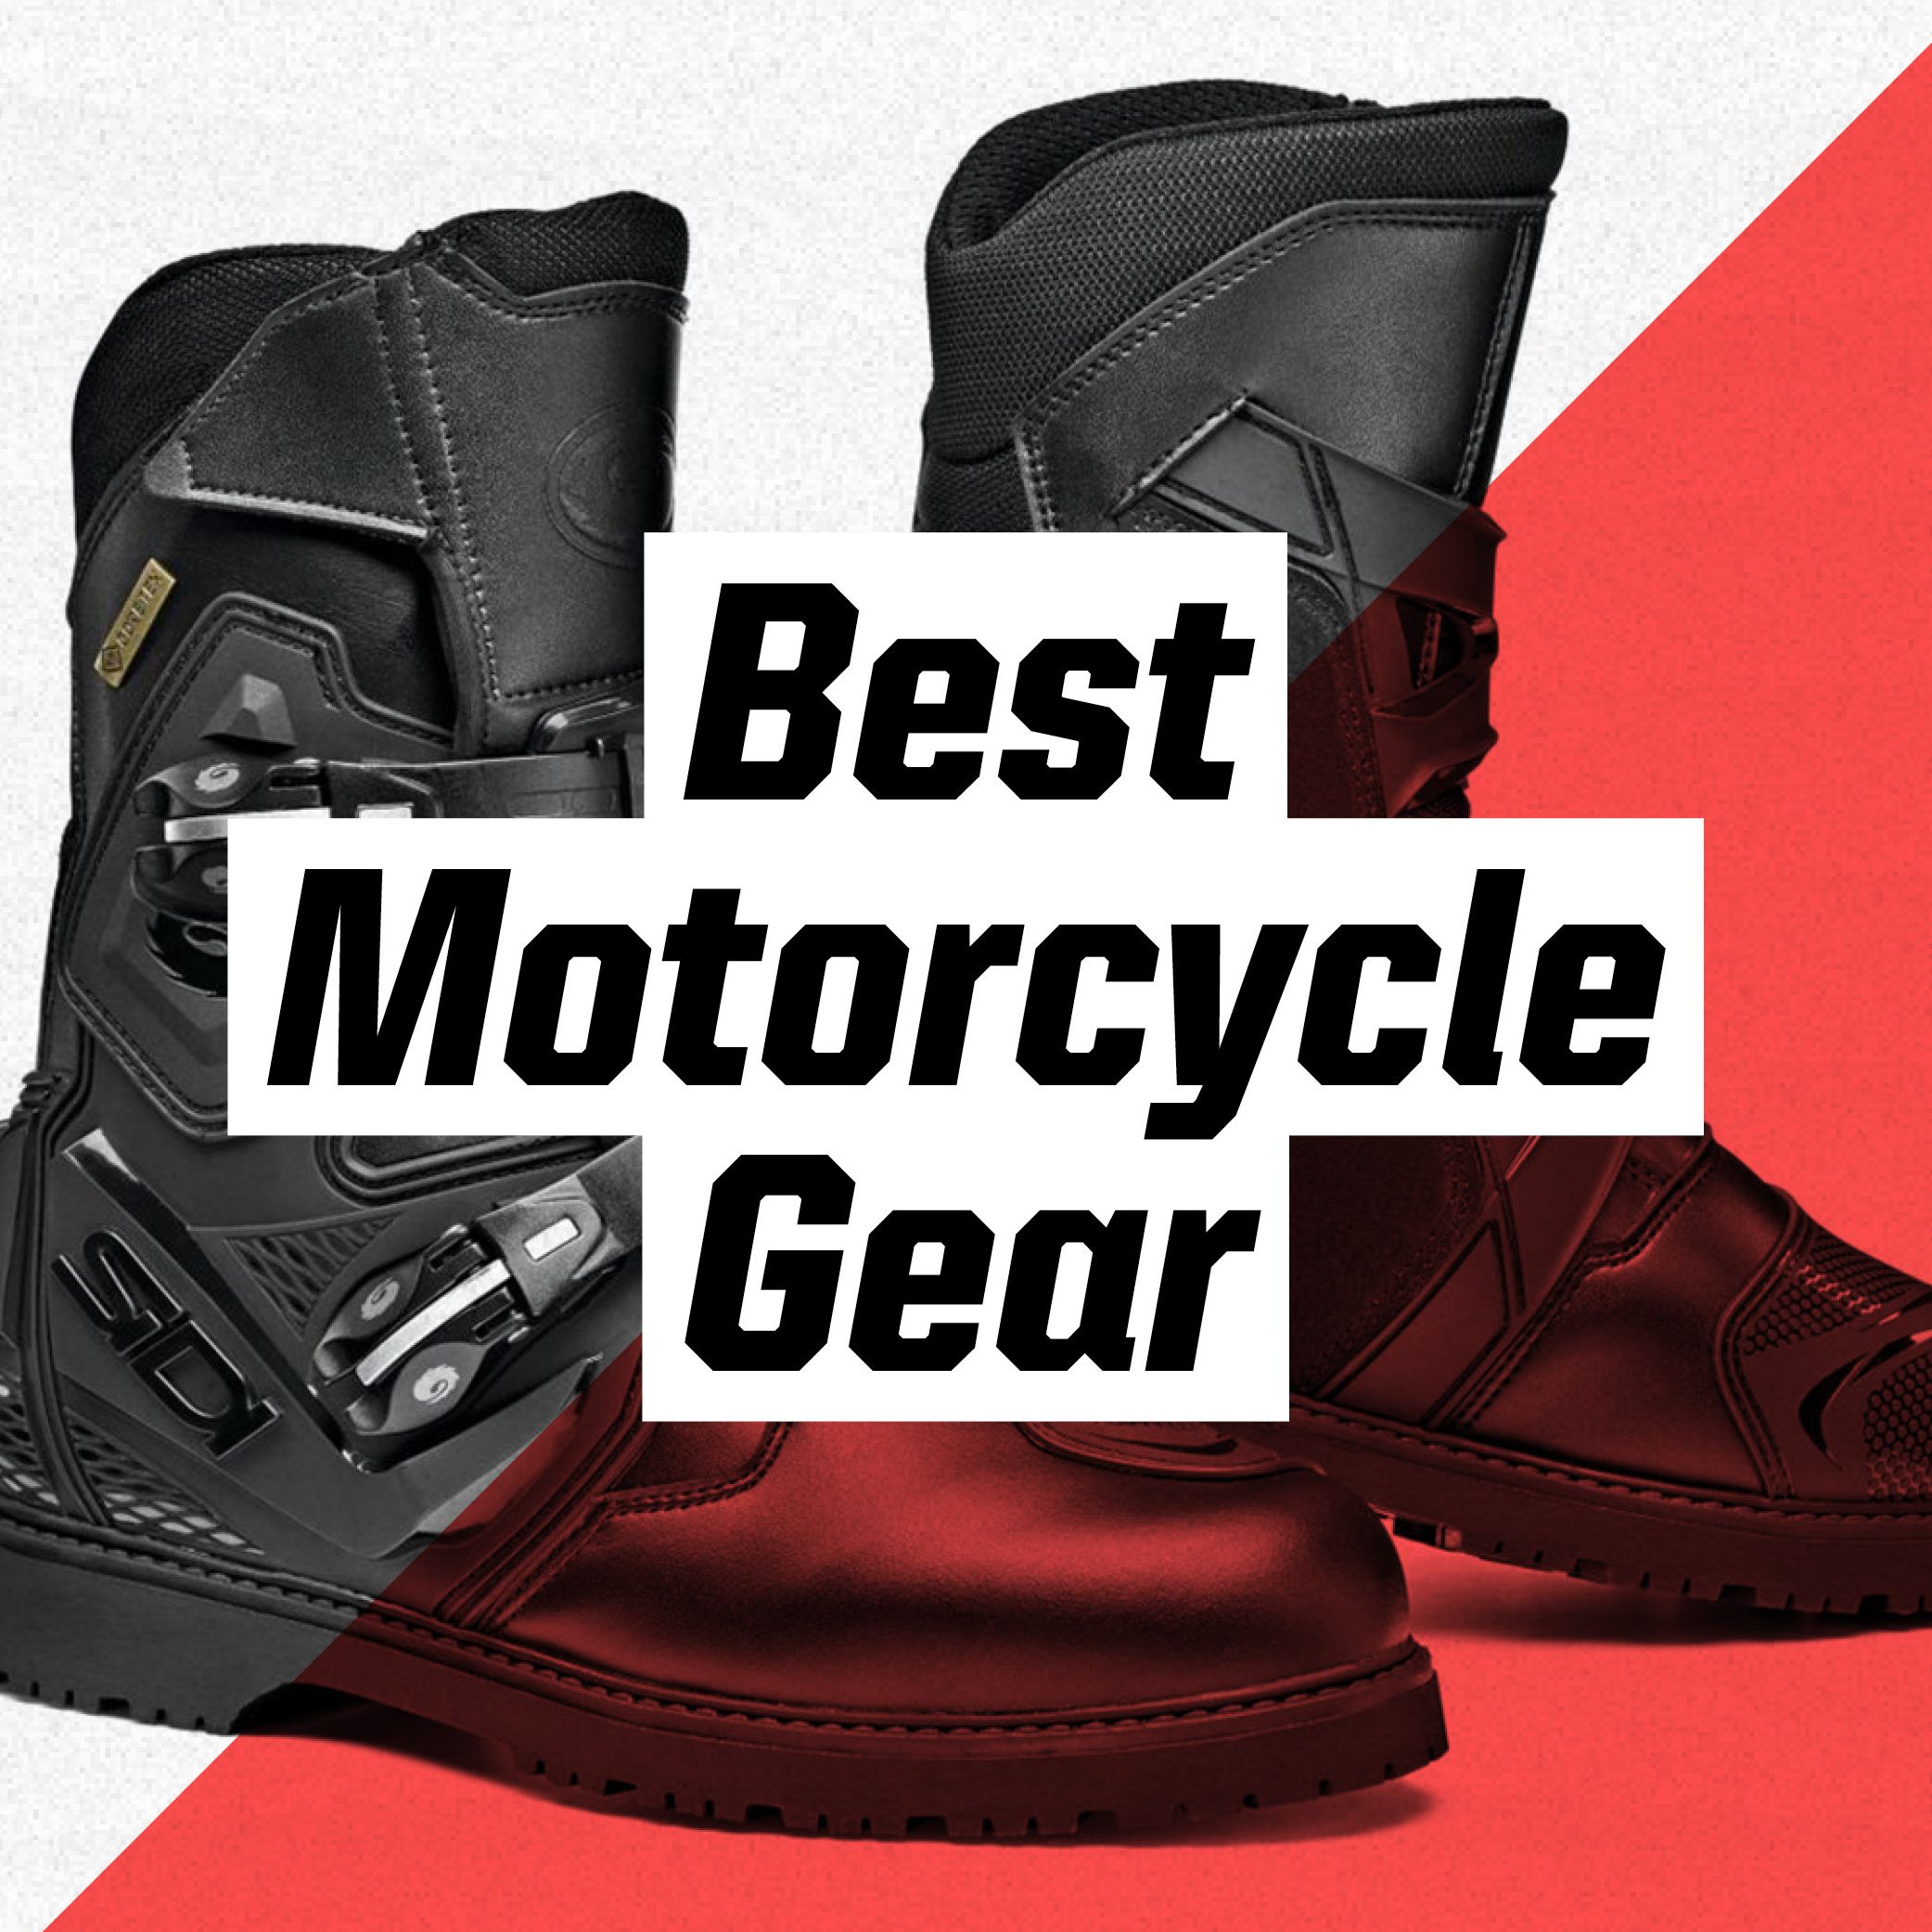 All the Best Motorcycle Gear You Need to Start Riding